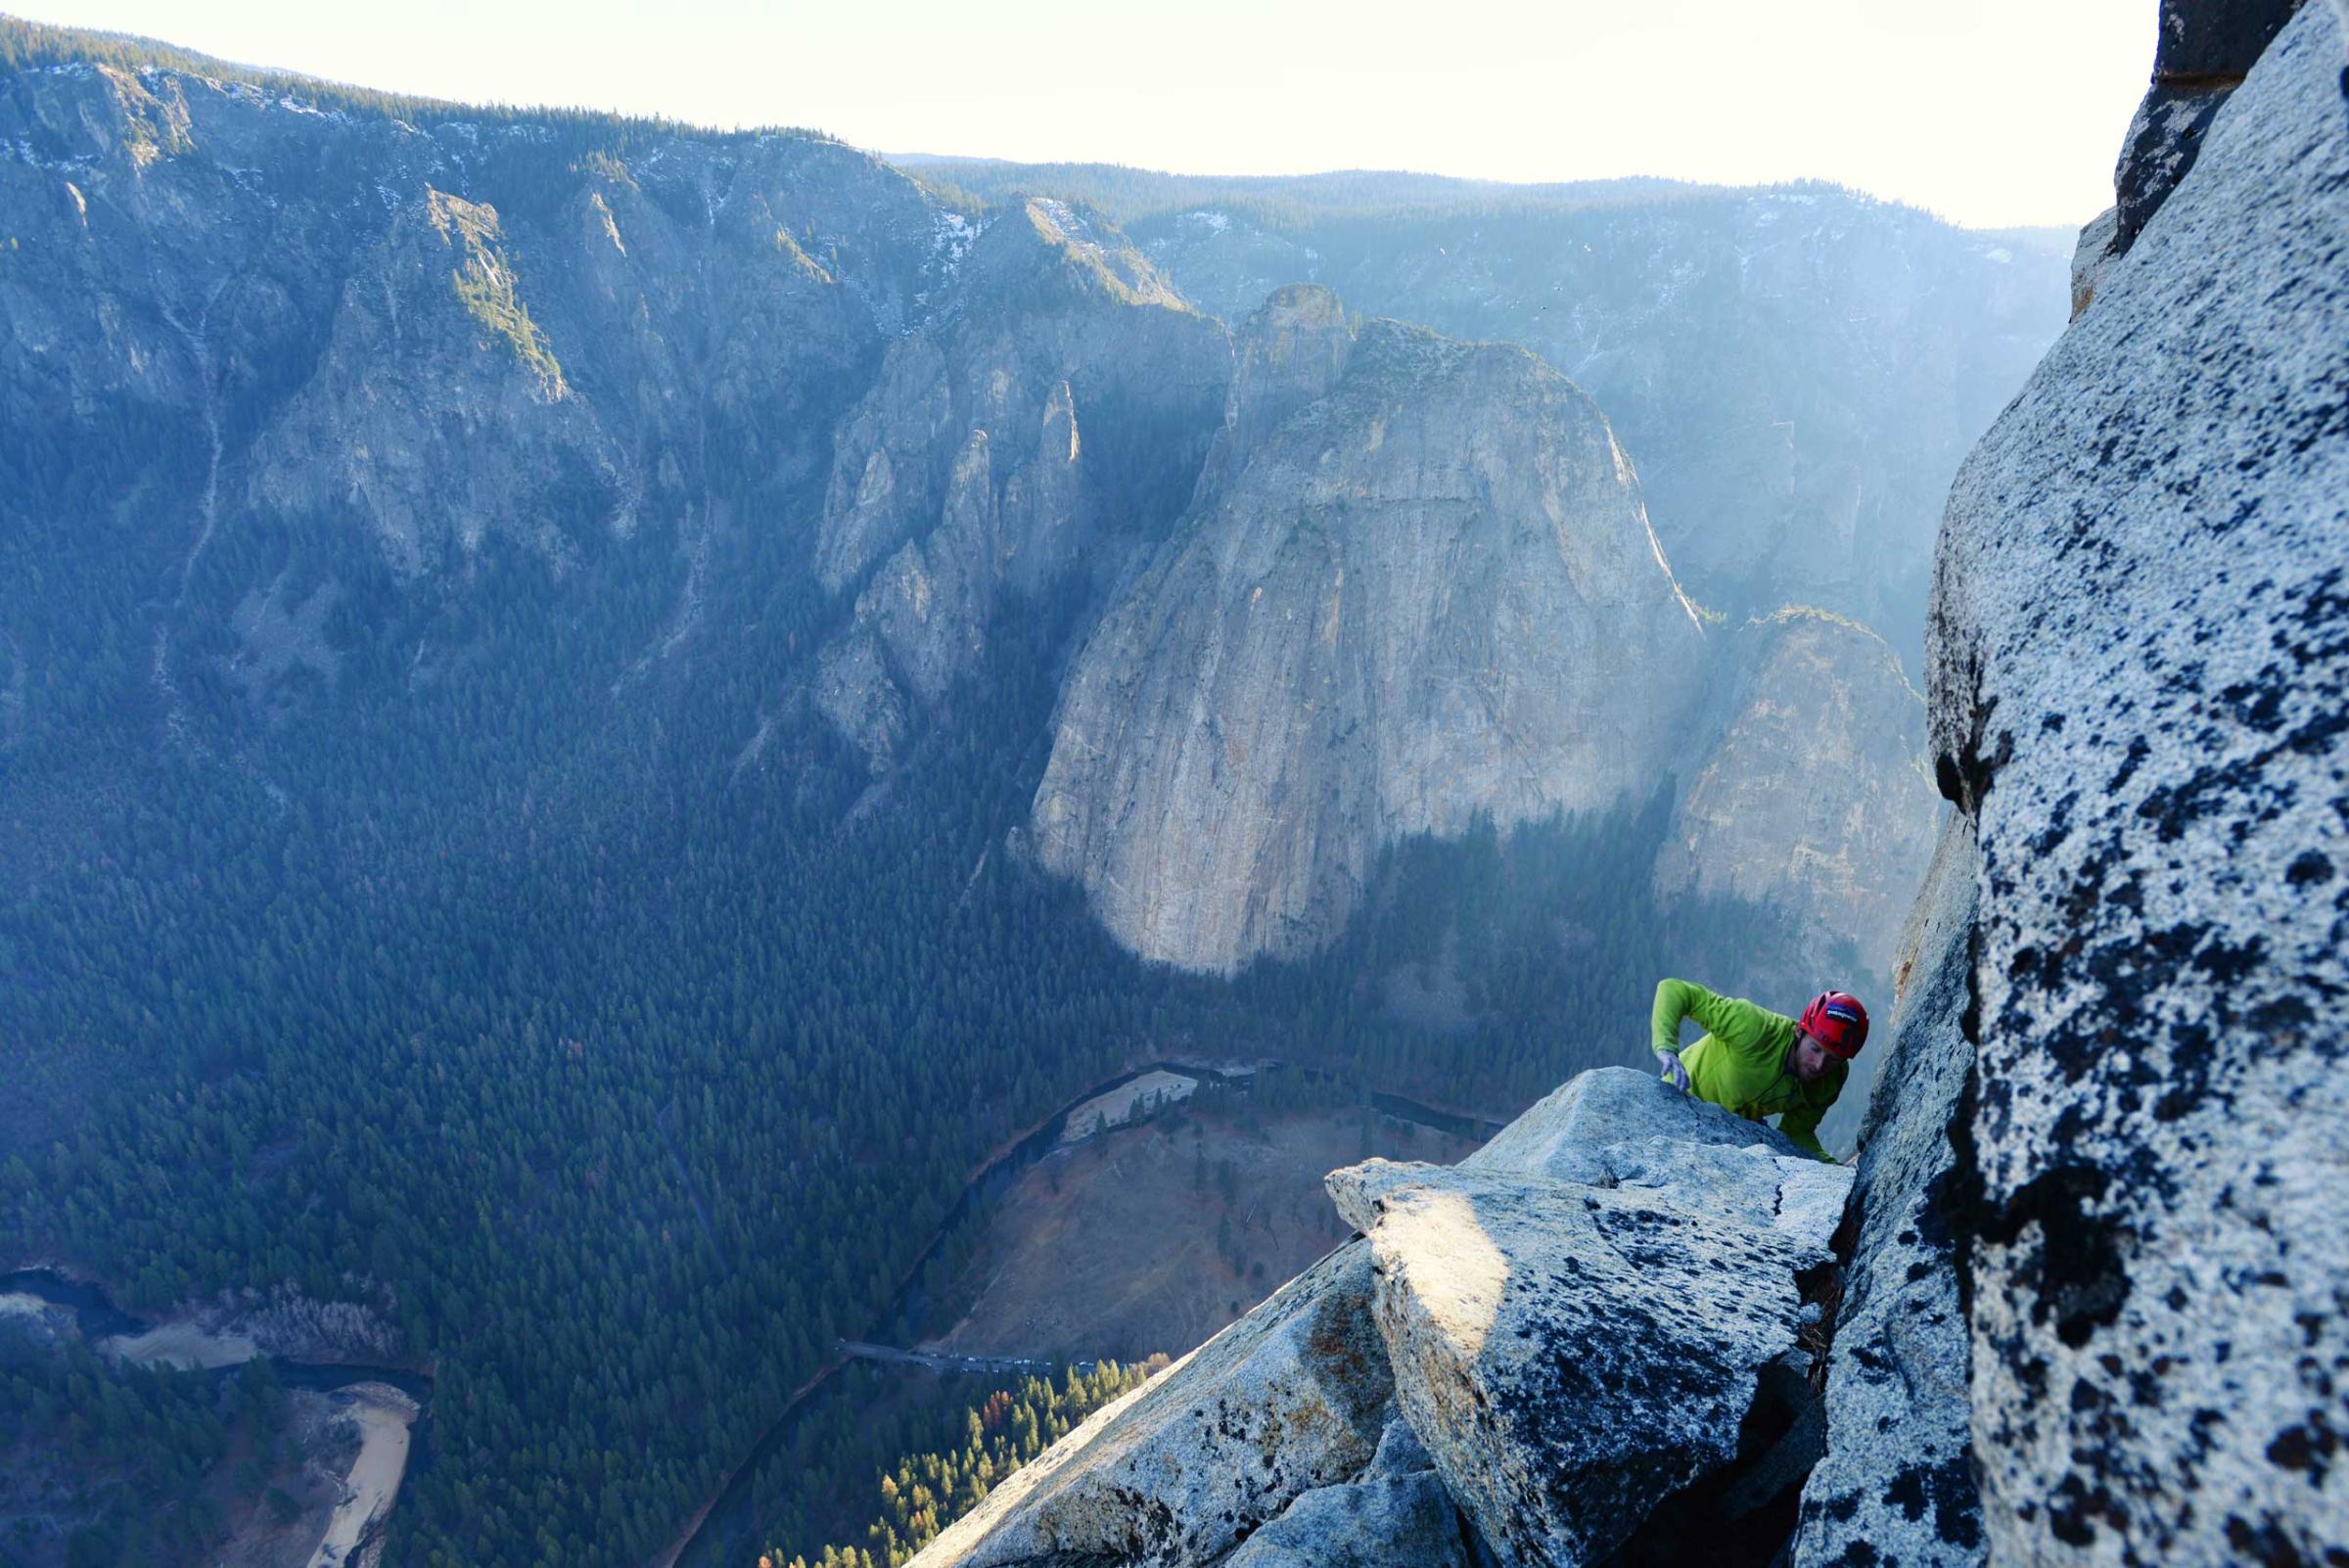 Tommy Caldwell completing historic Dawn Wall free climb